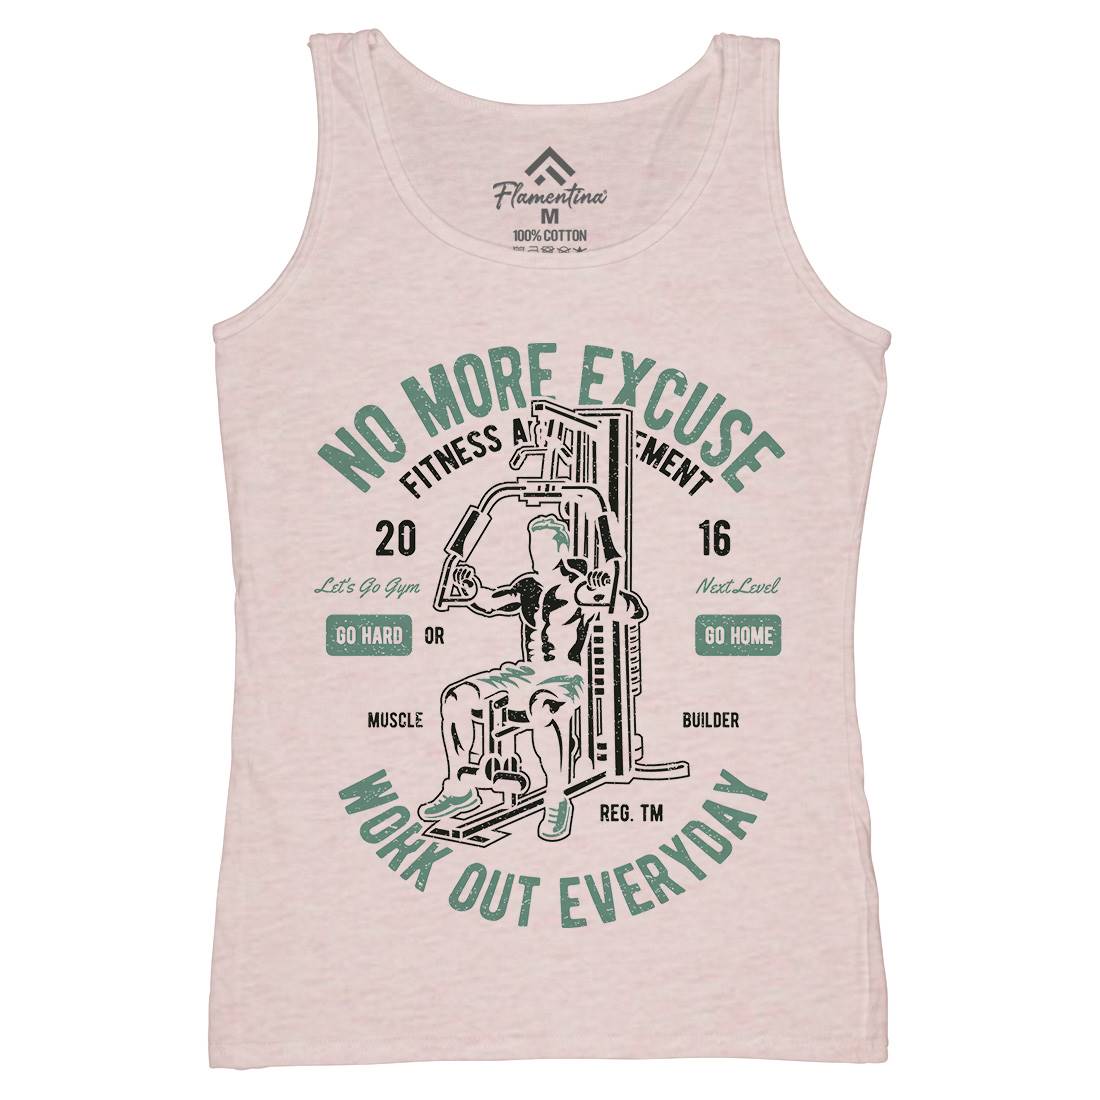 Work Out Everyday Womens Organic Tank Top Vest Gym A198